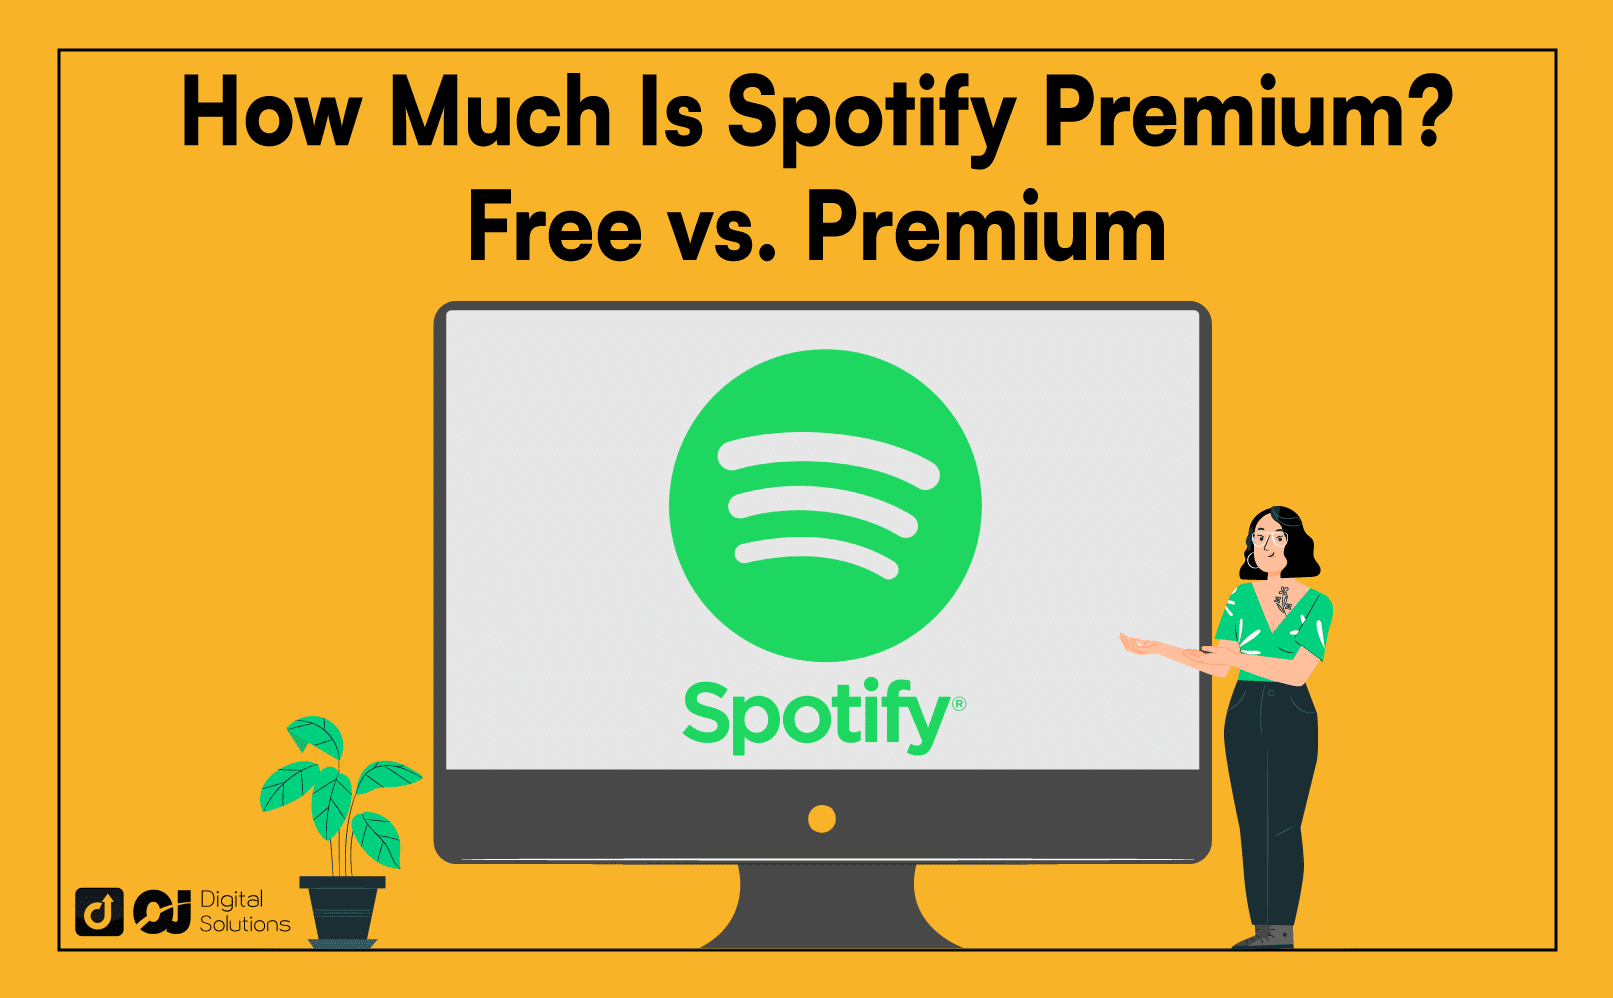 How Much is Spotify Premium? (Spotify Free vs Premium)